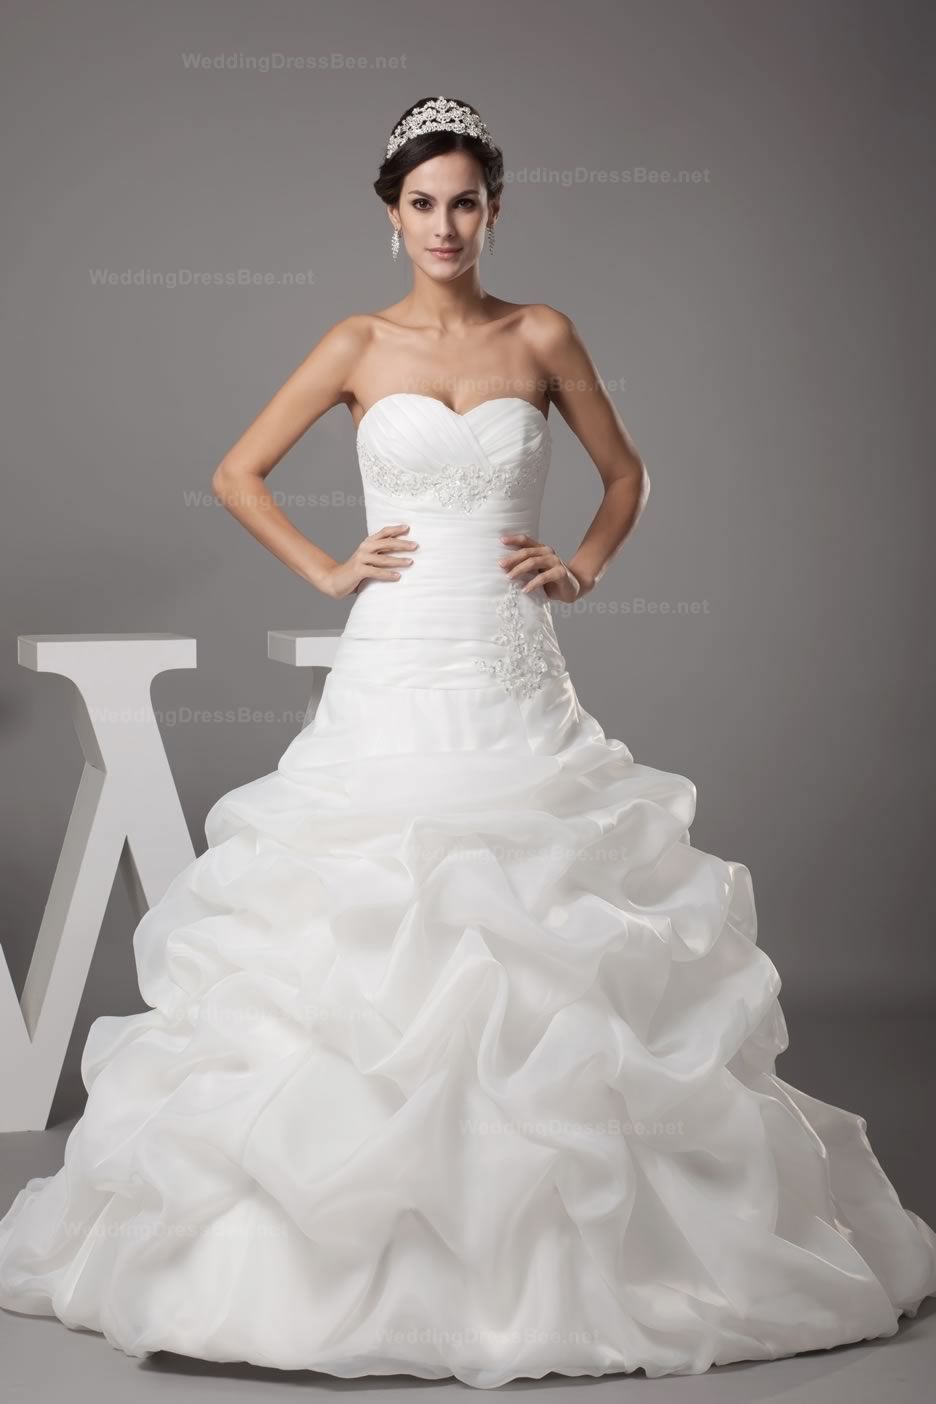 Majestic Sweetheart Pleats And Beaded Appliques Organza Bubble Dress